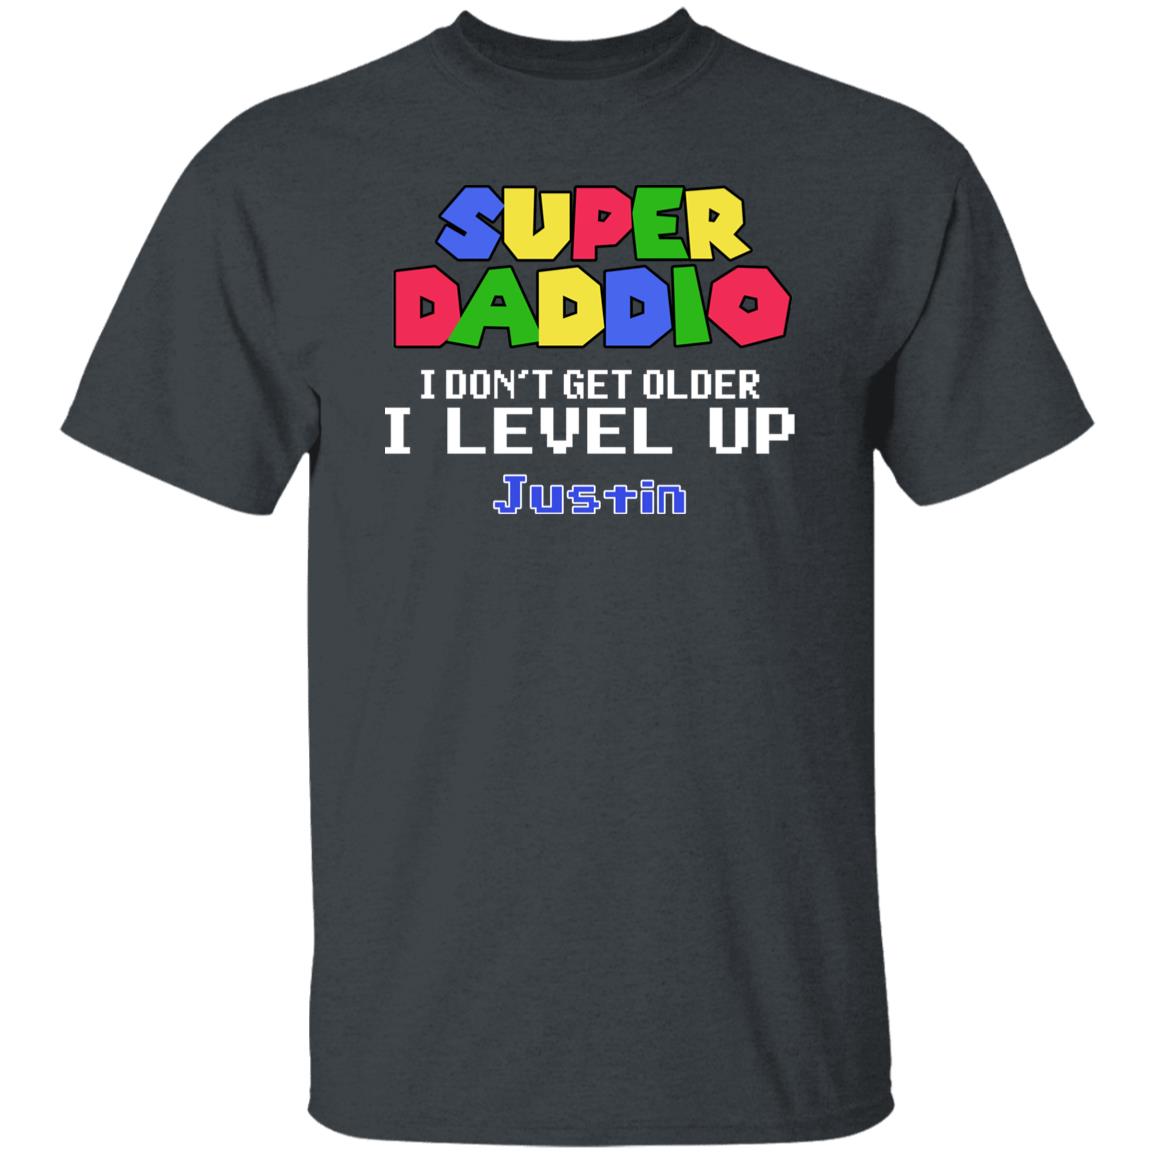 Personalized Shirt - Super Daddio I Don't Get Older Funny Gifts for Dad